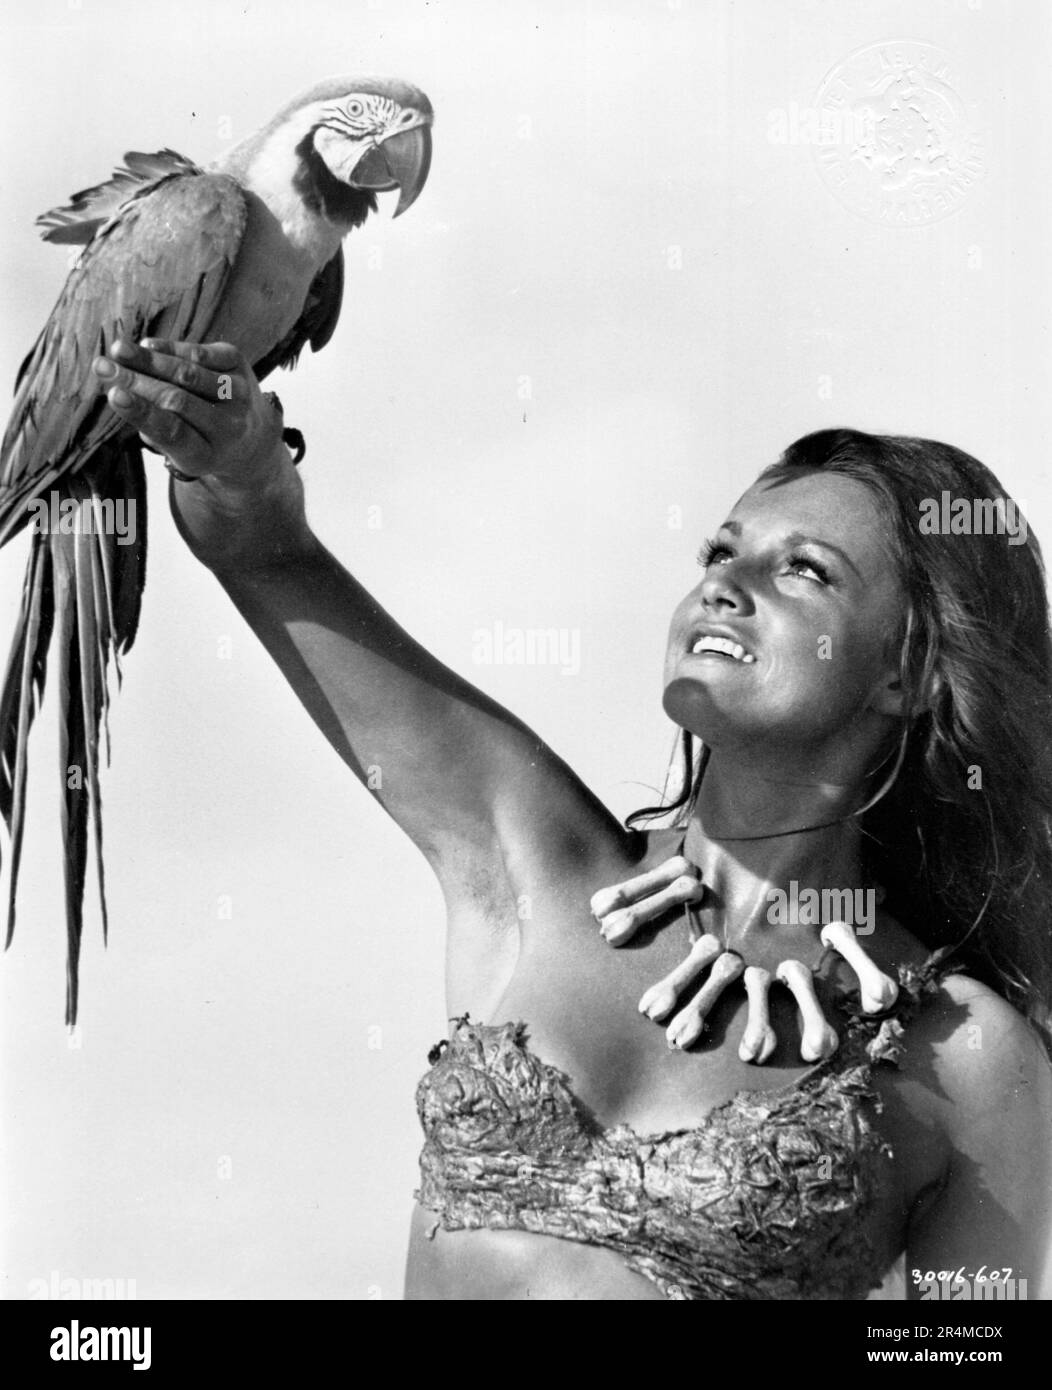 IMOGEN HASSALL in WHEN DINOSAURS RULED THE EARTH (1970), directed by VAL GUEST. Credit: HAMMER FILM PRODUCTIONS / Album Stock Photo